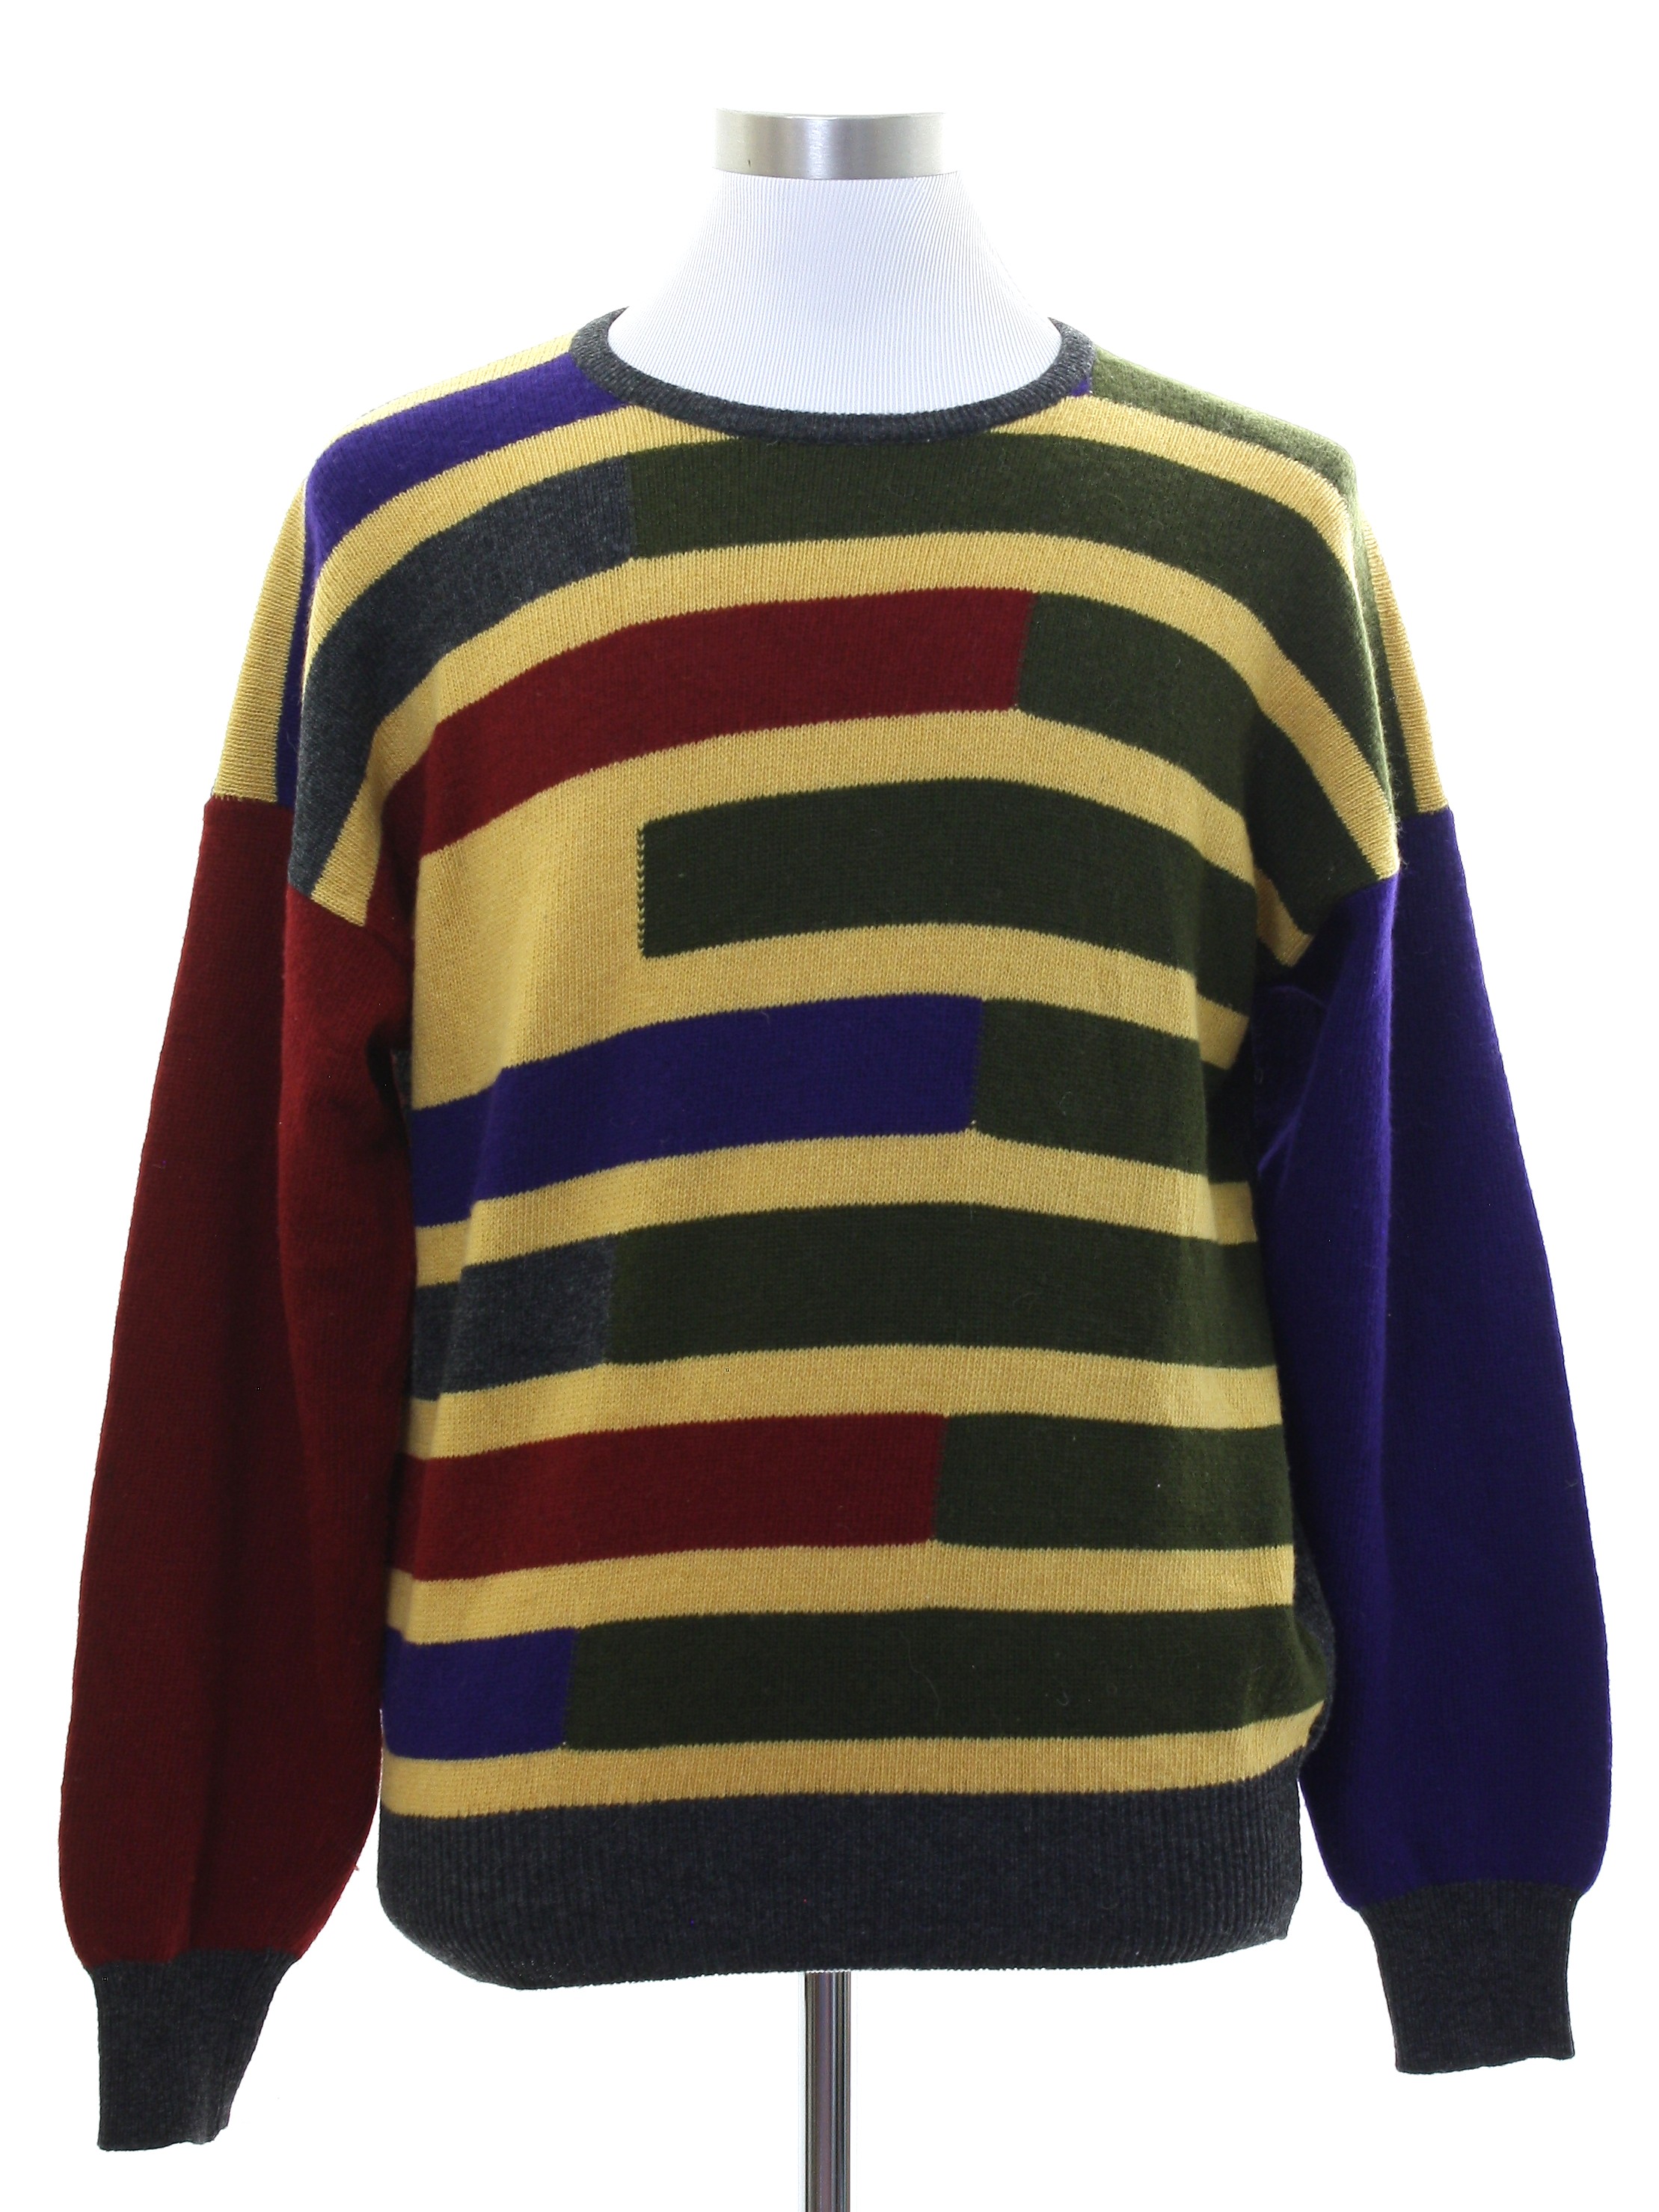 90s Retro Sweater: Early 90s -No Label- Mens Multicolor background wool ...